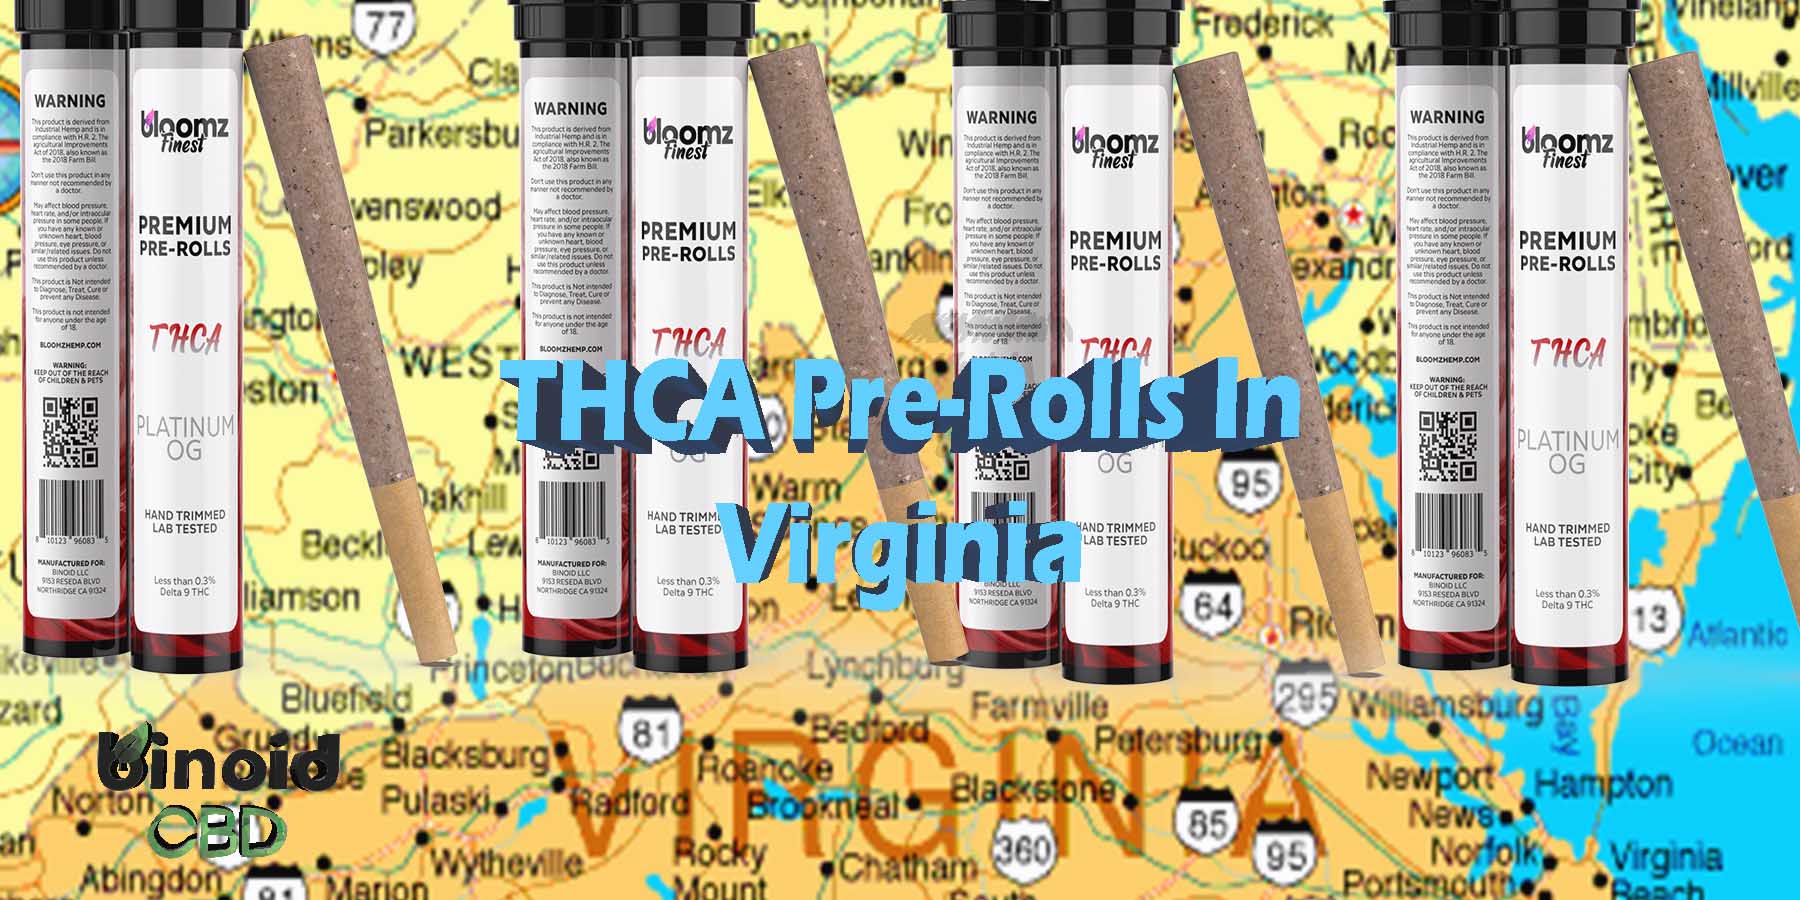 THCA Pre Rolls In Virginia Hemp Flower Indica Where To Get Near Me Best Place Lowest Price Coupon Discount Strongest Brand Bloomz